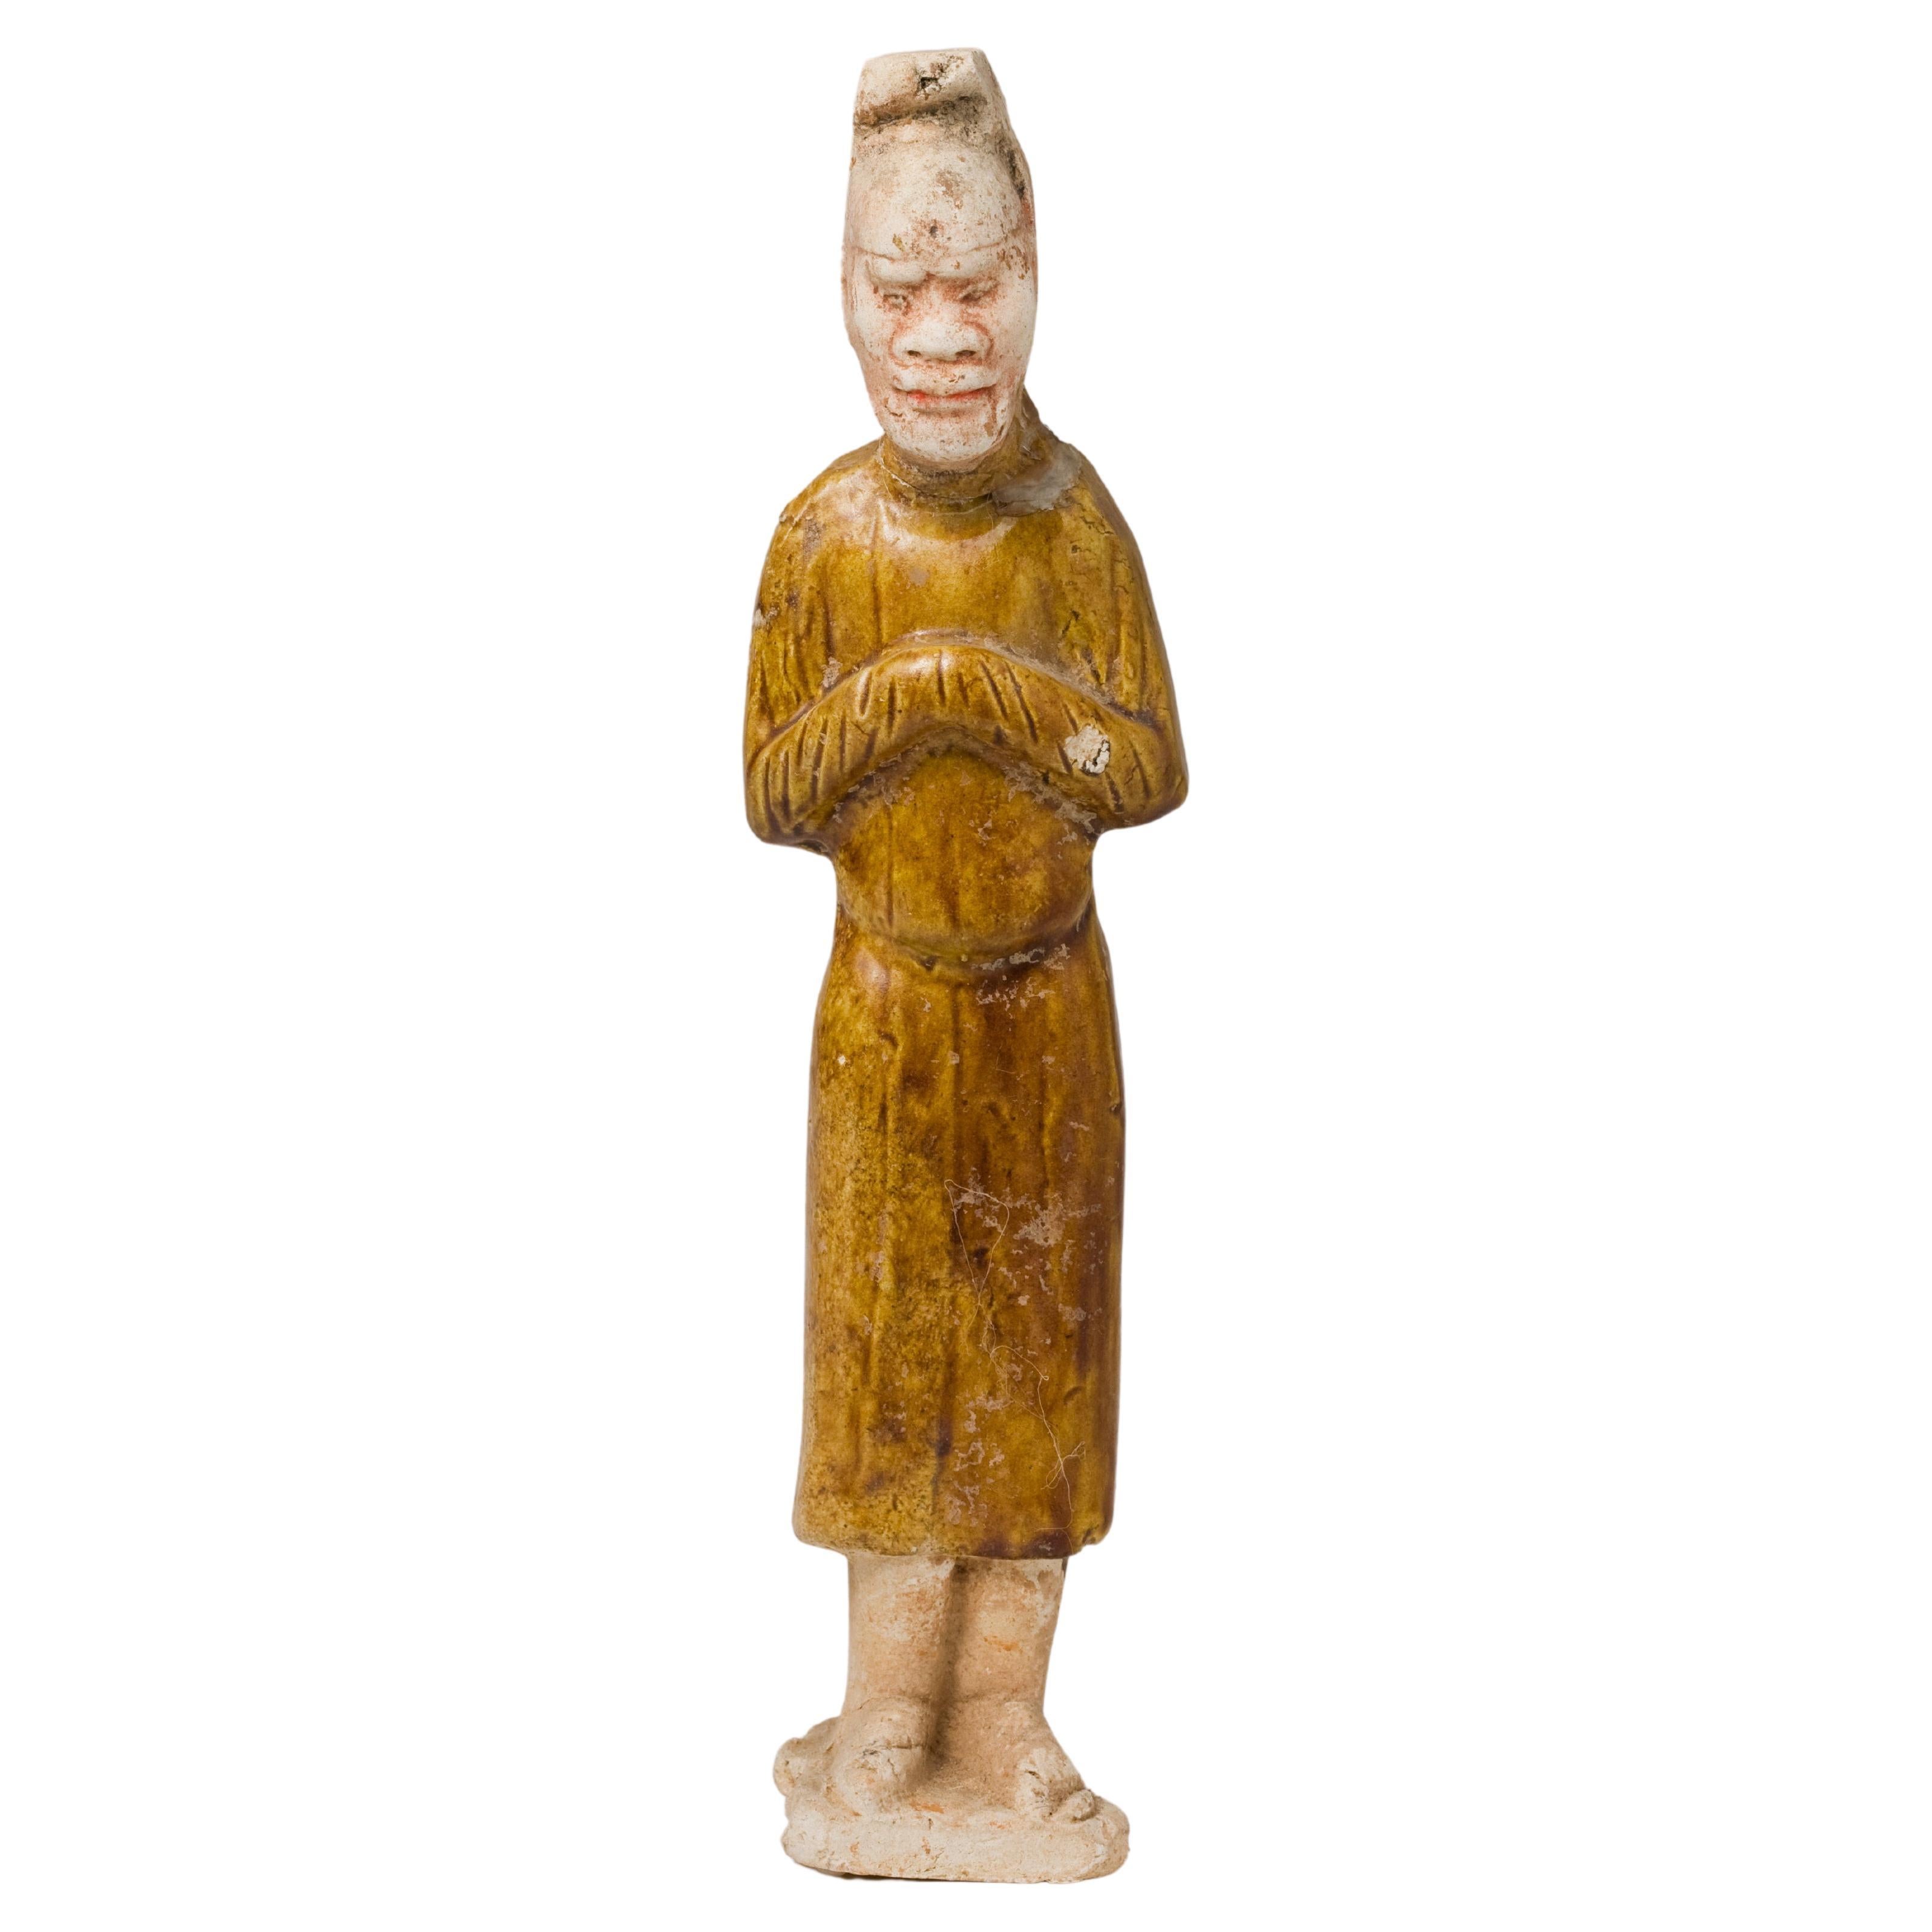 Amber-Glazed Pottery Figure Of A Foreign Official, Tang-Liao Dynasty(7-12th c)